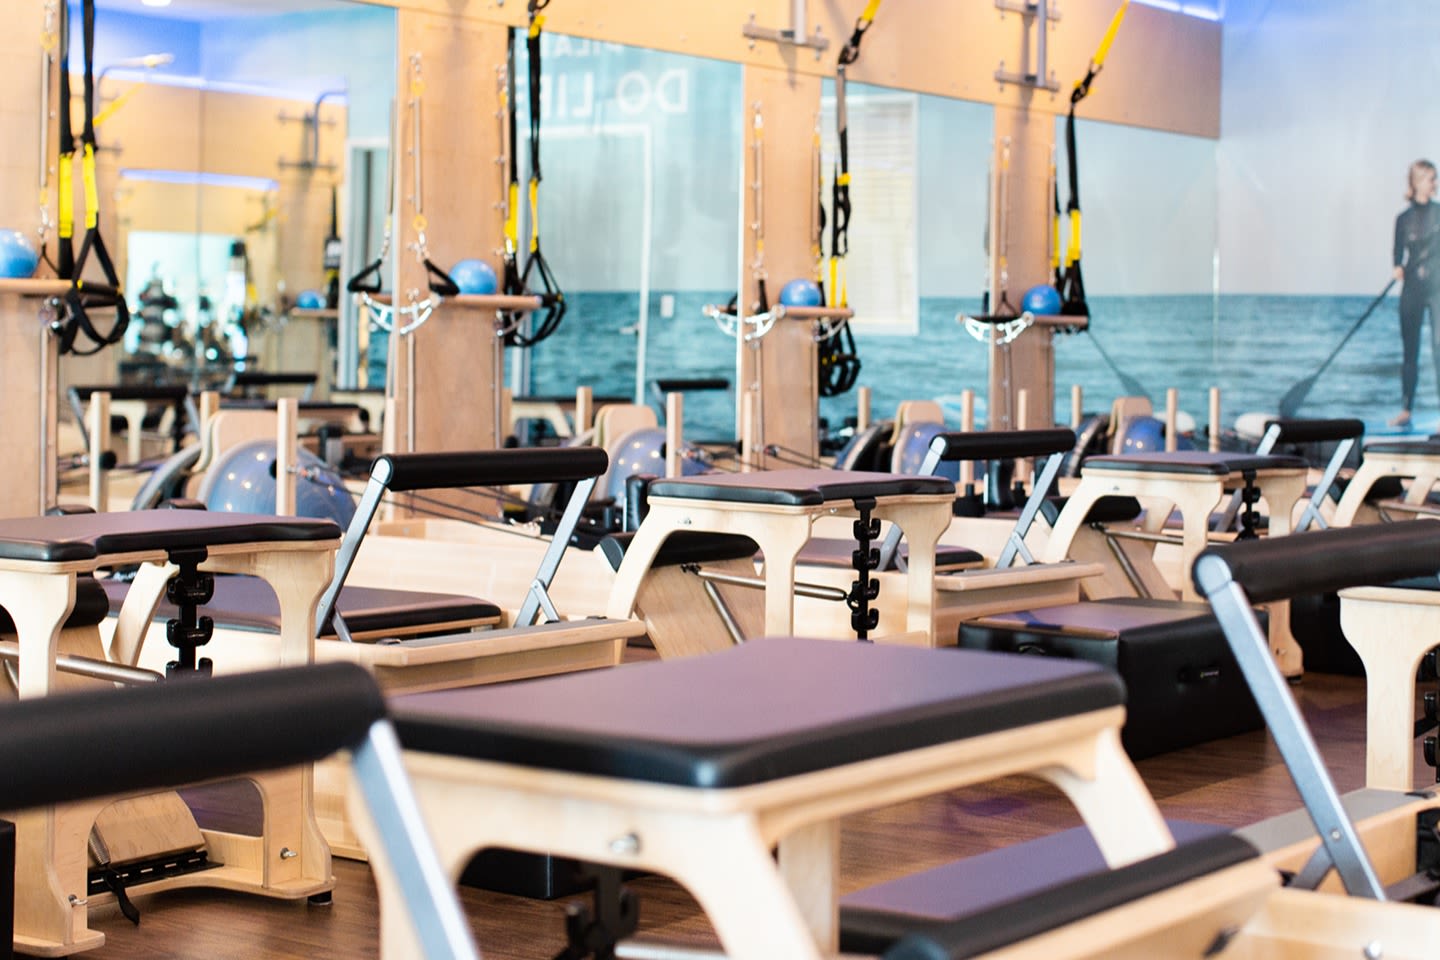 Club Pilates - Emerson: Read Reviews and Book Classes on ClassPass